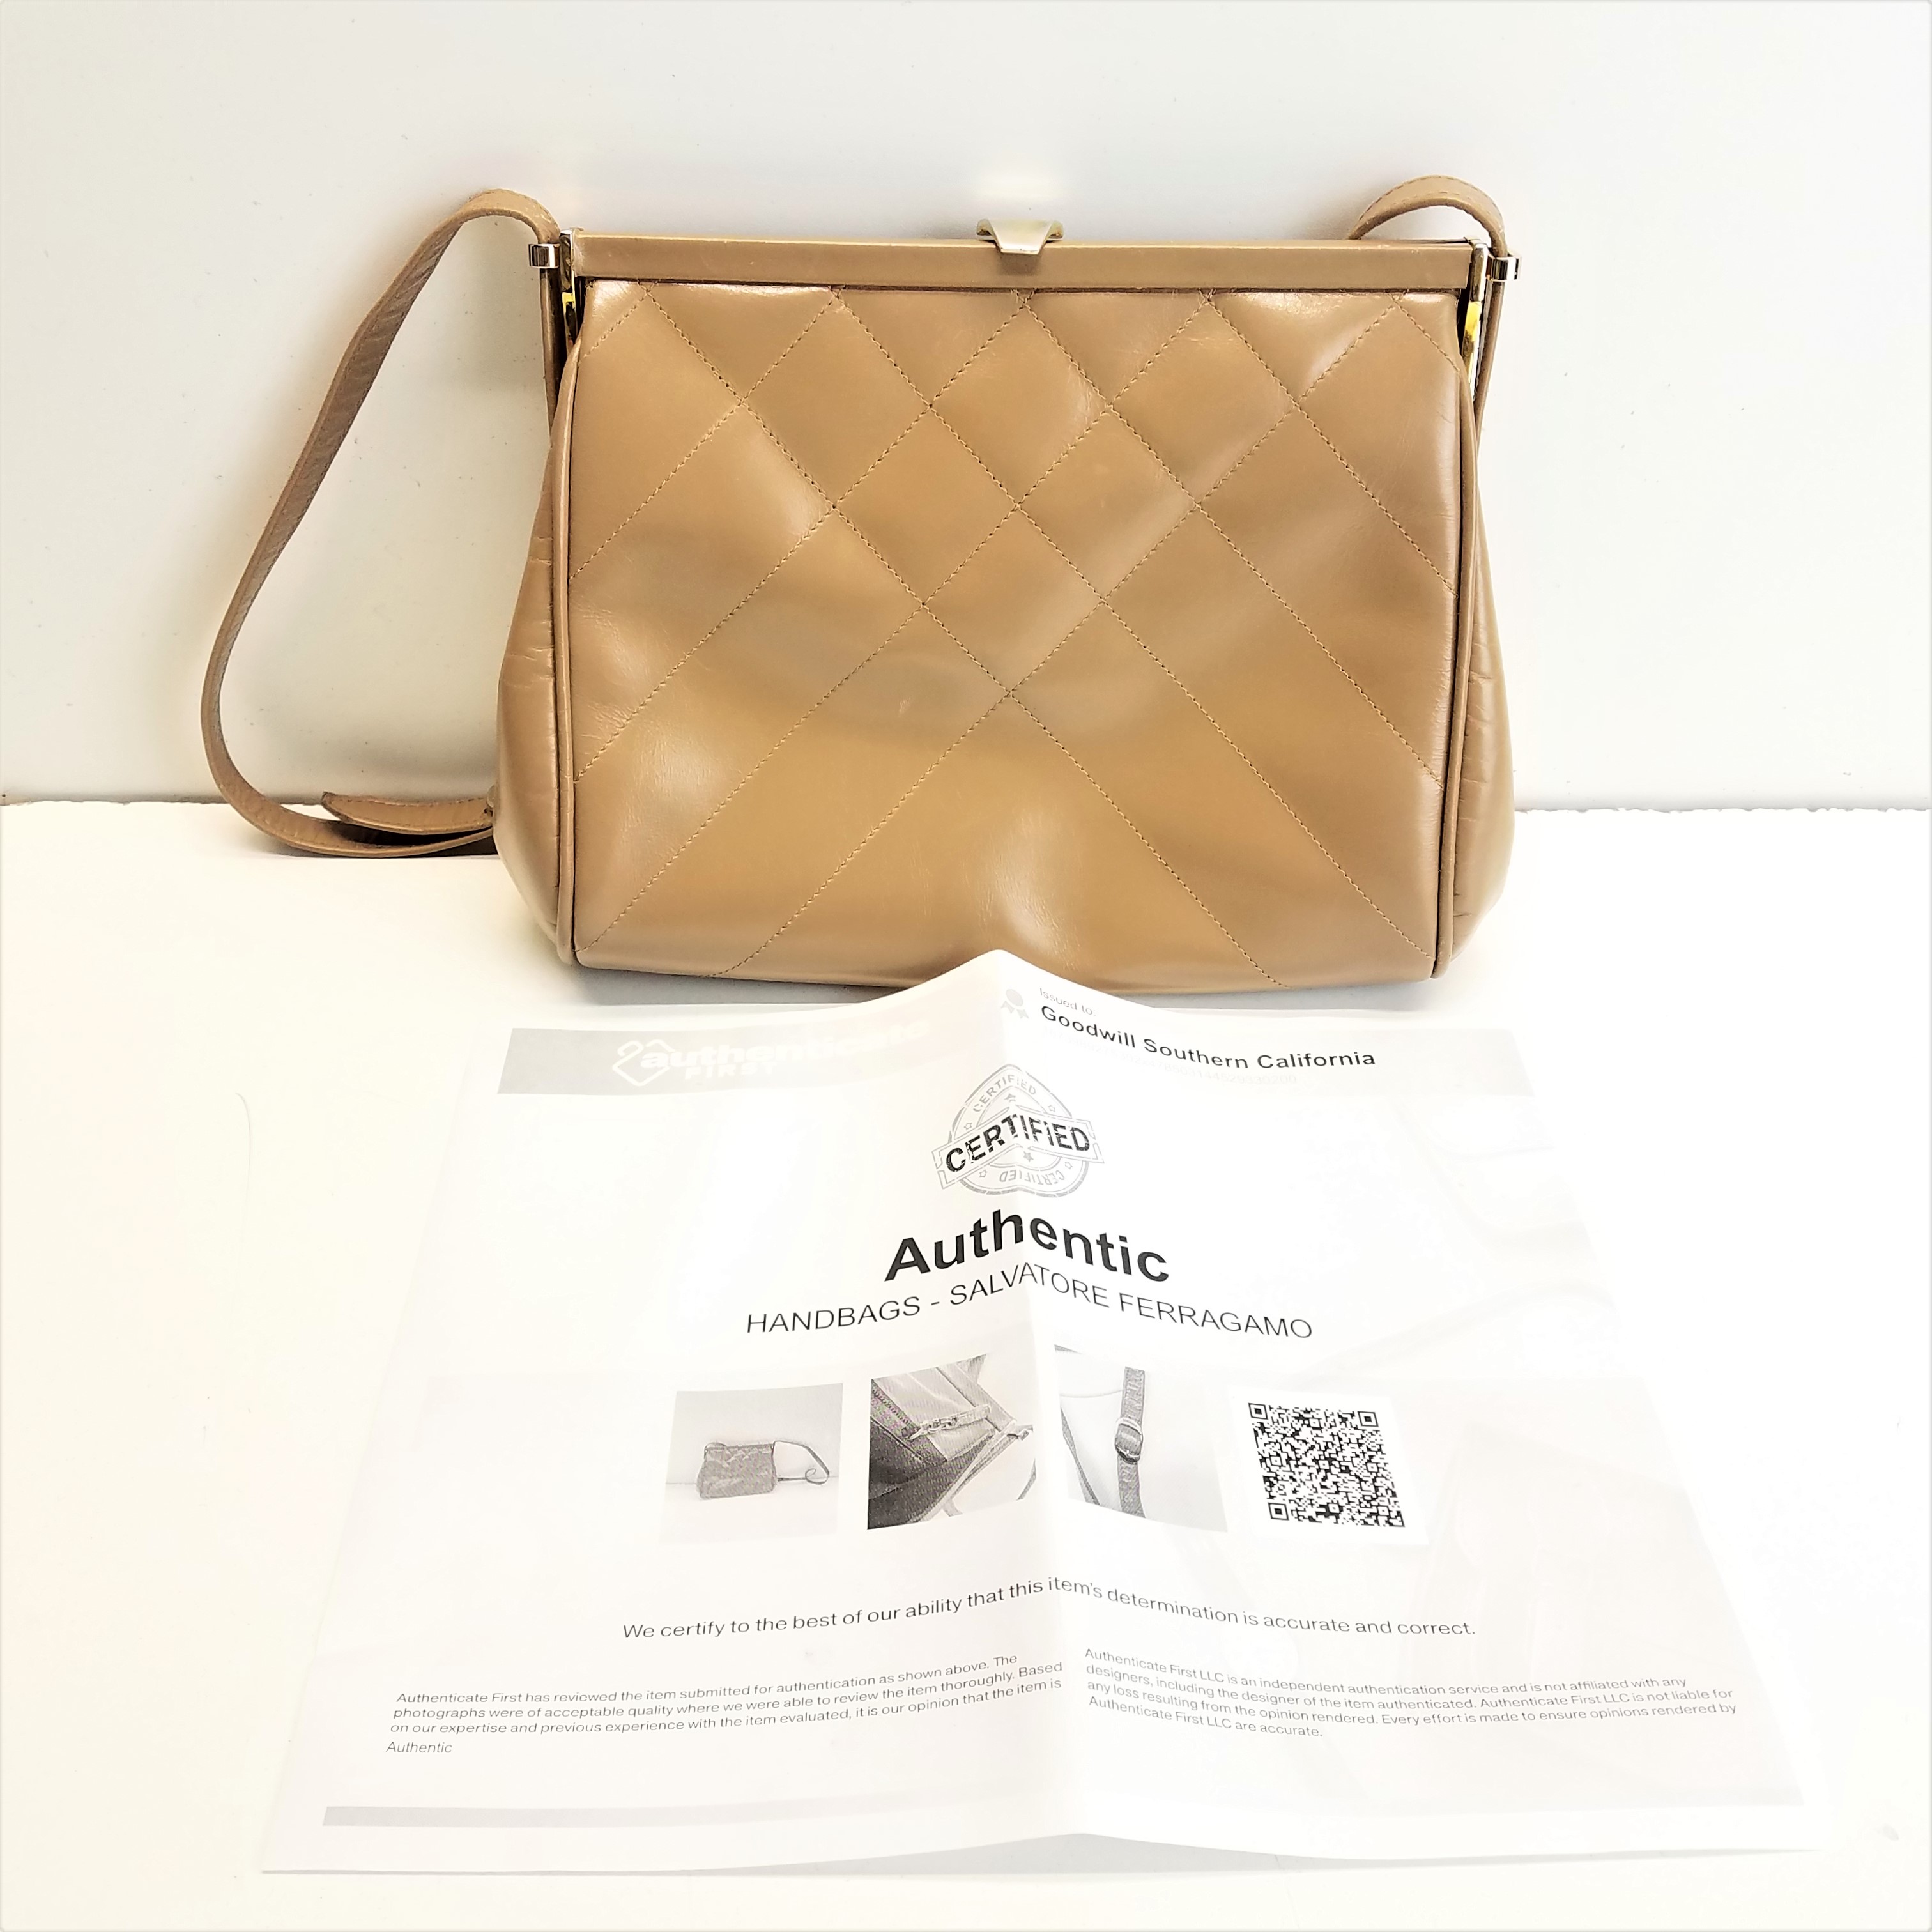 Calvin Klein - Authenticated Handbag - Leather Beige For Woman, Very Good condition